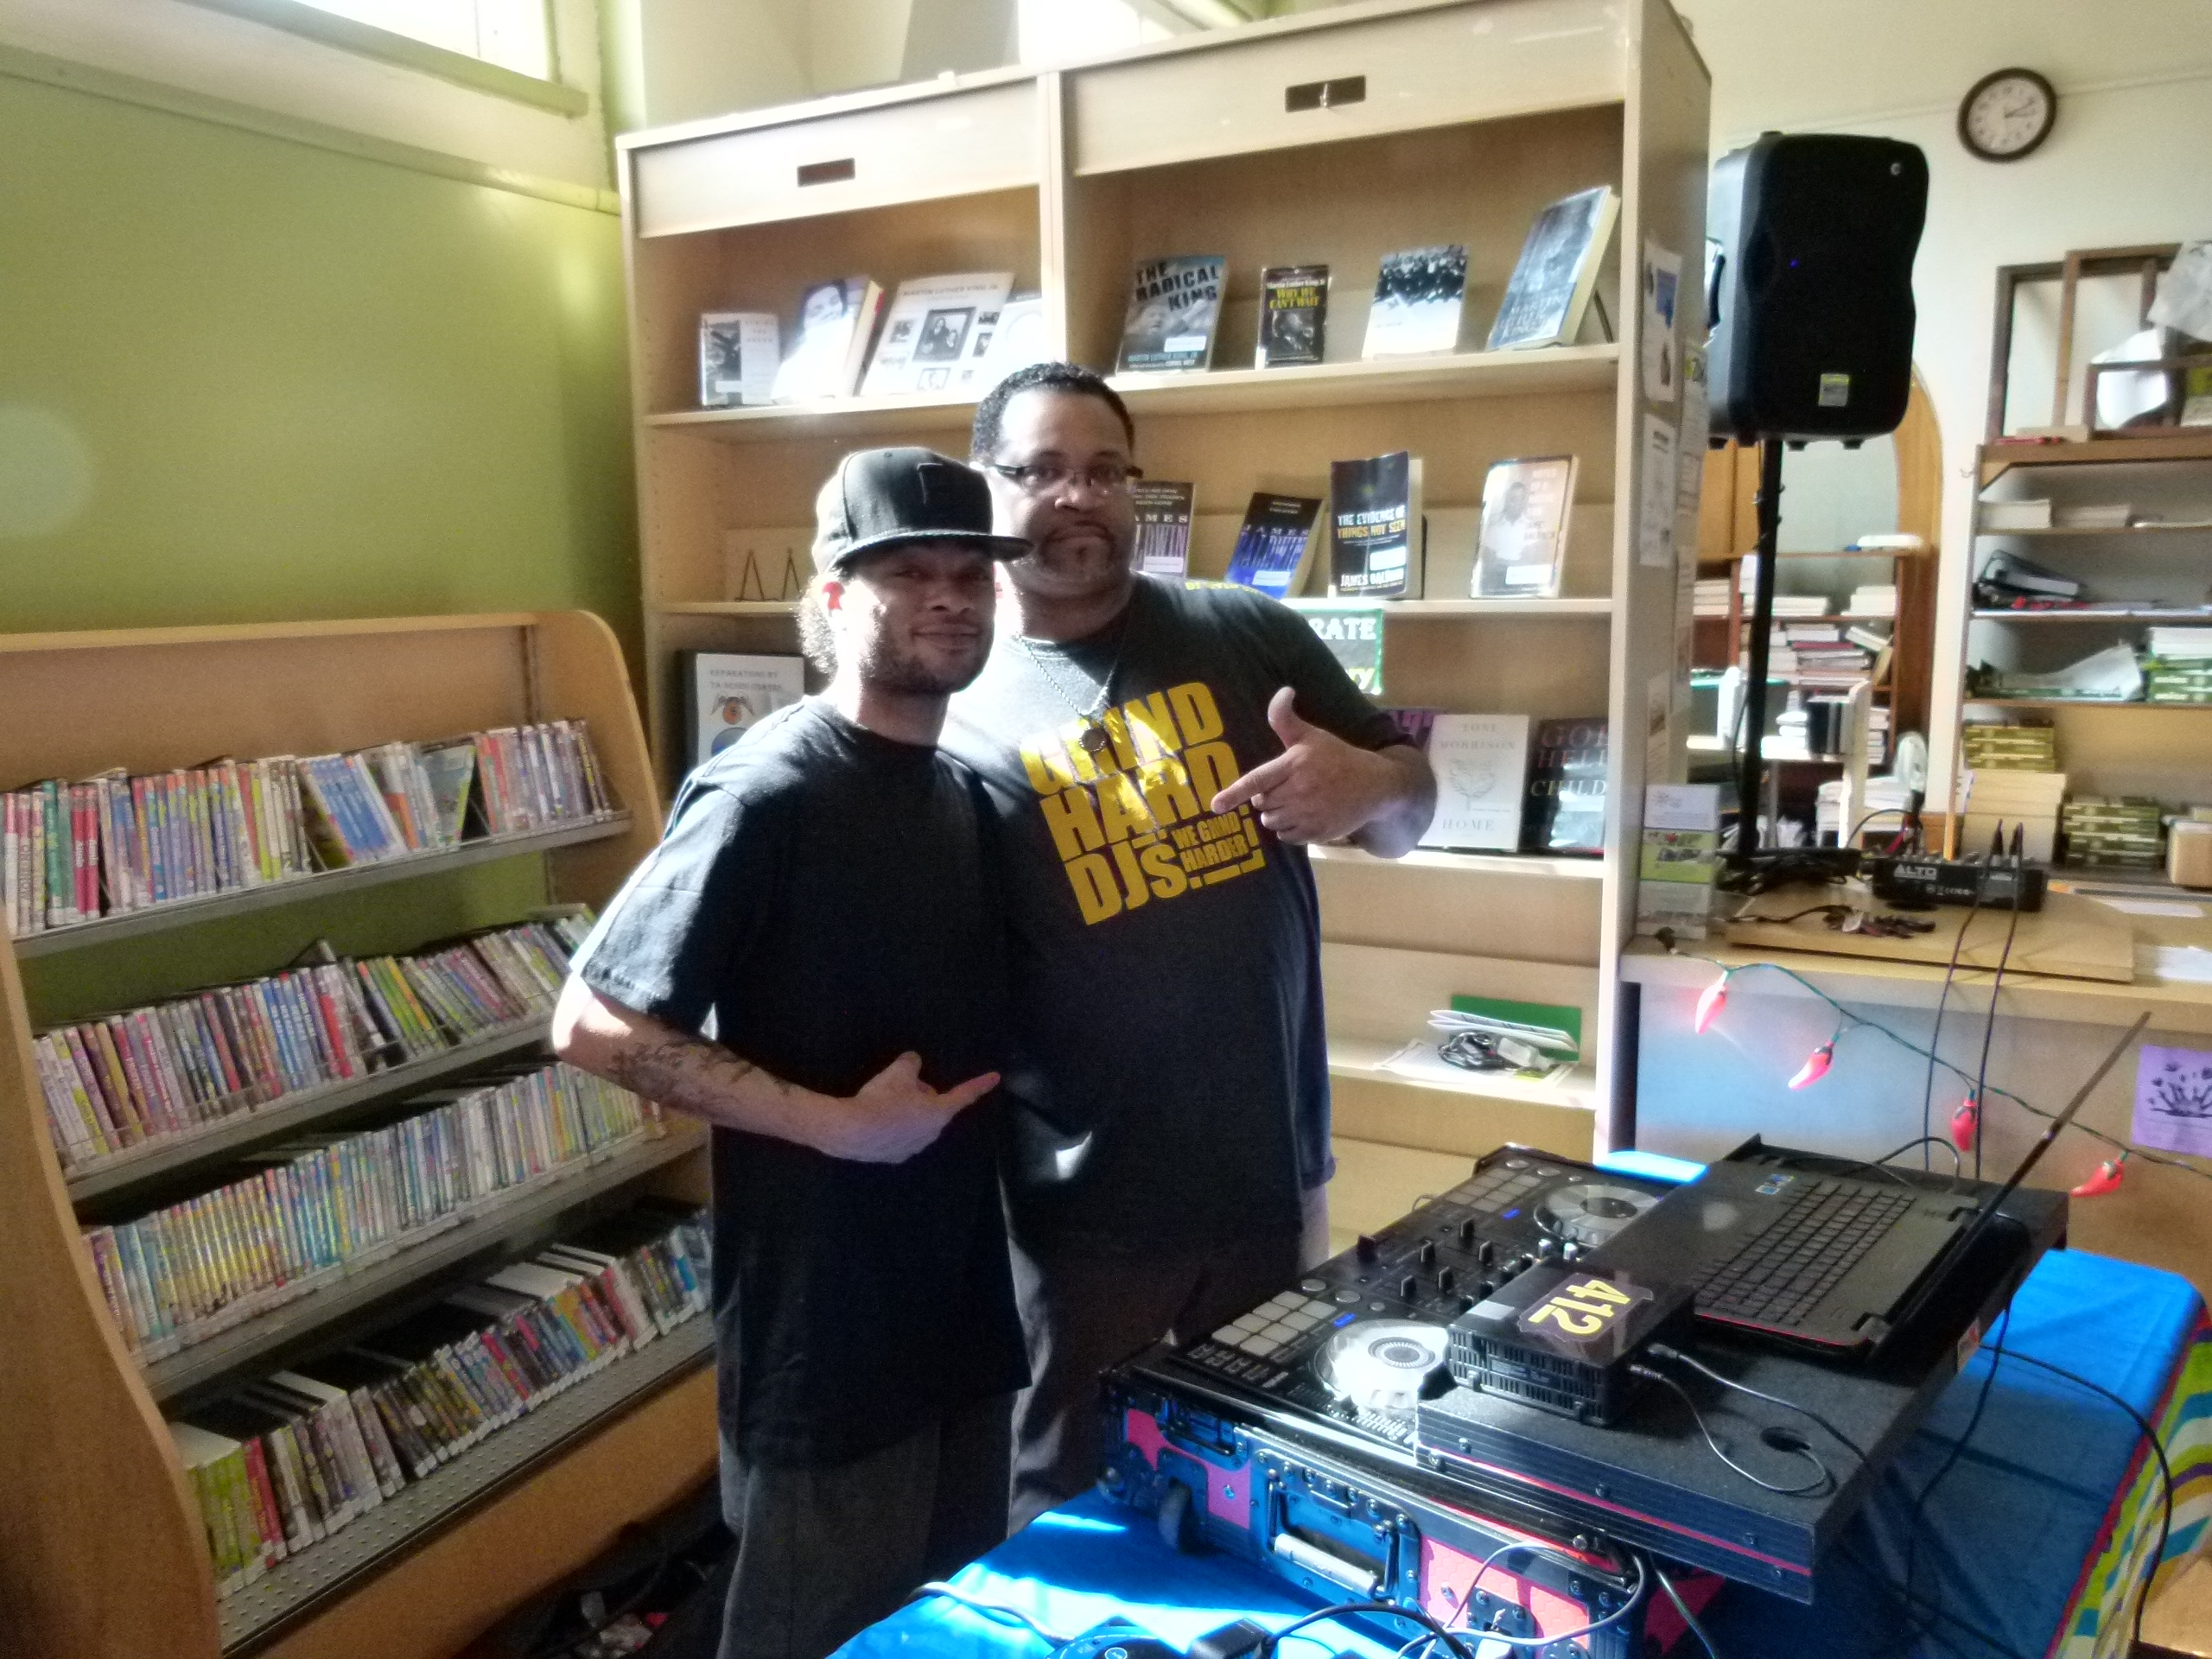 DJ Wyld Chyld (Sean Walker) (l.) and his protege Terance Boddy (r.) create the music mix for the event.